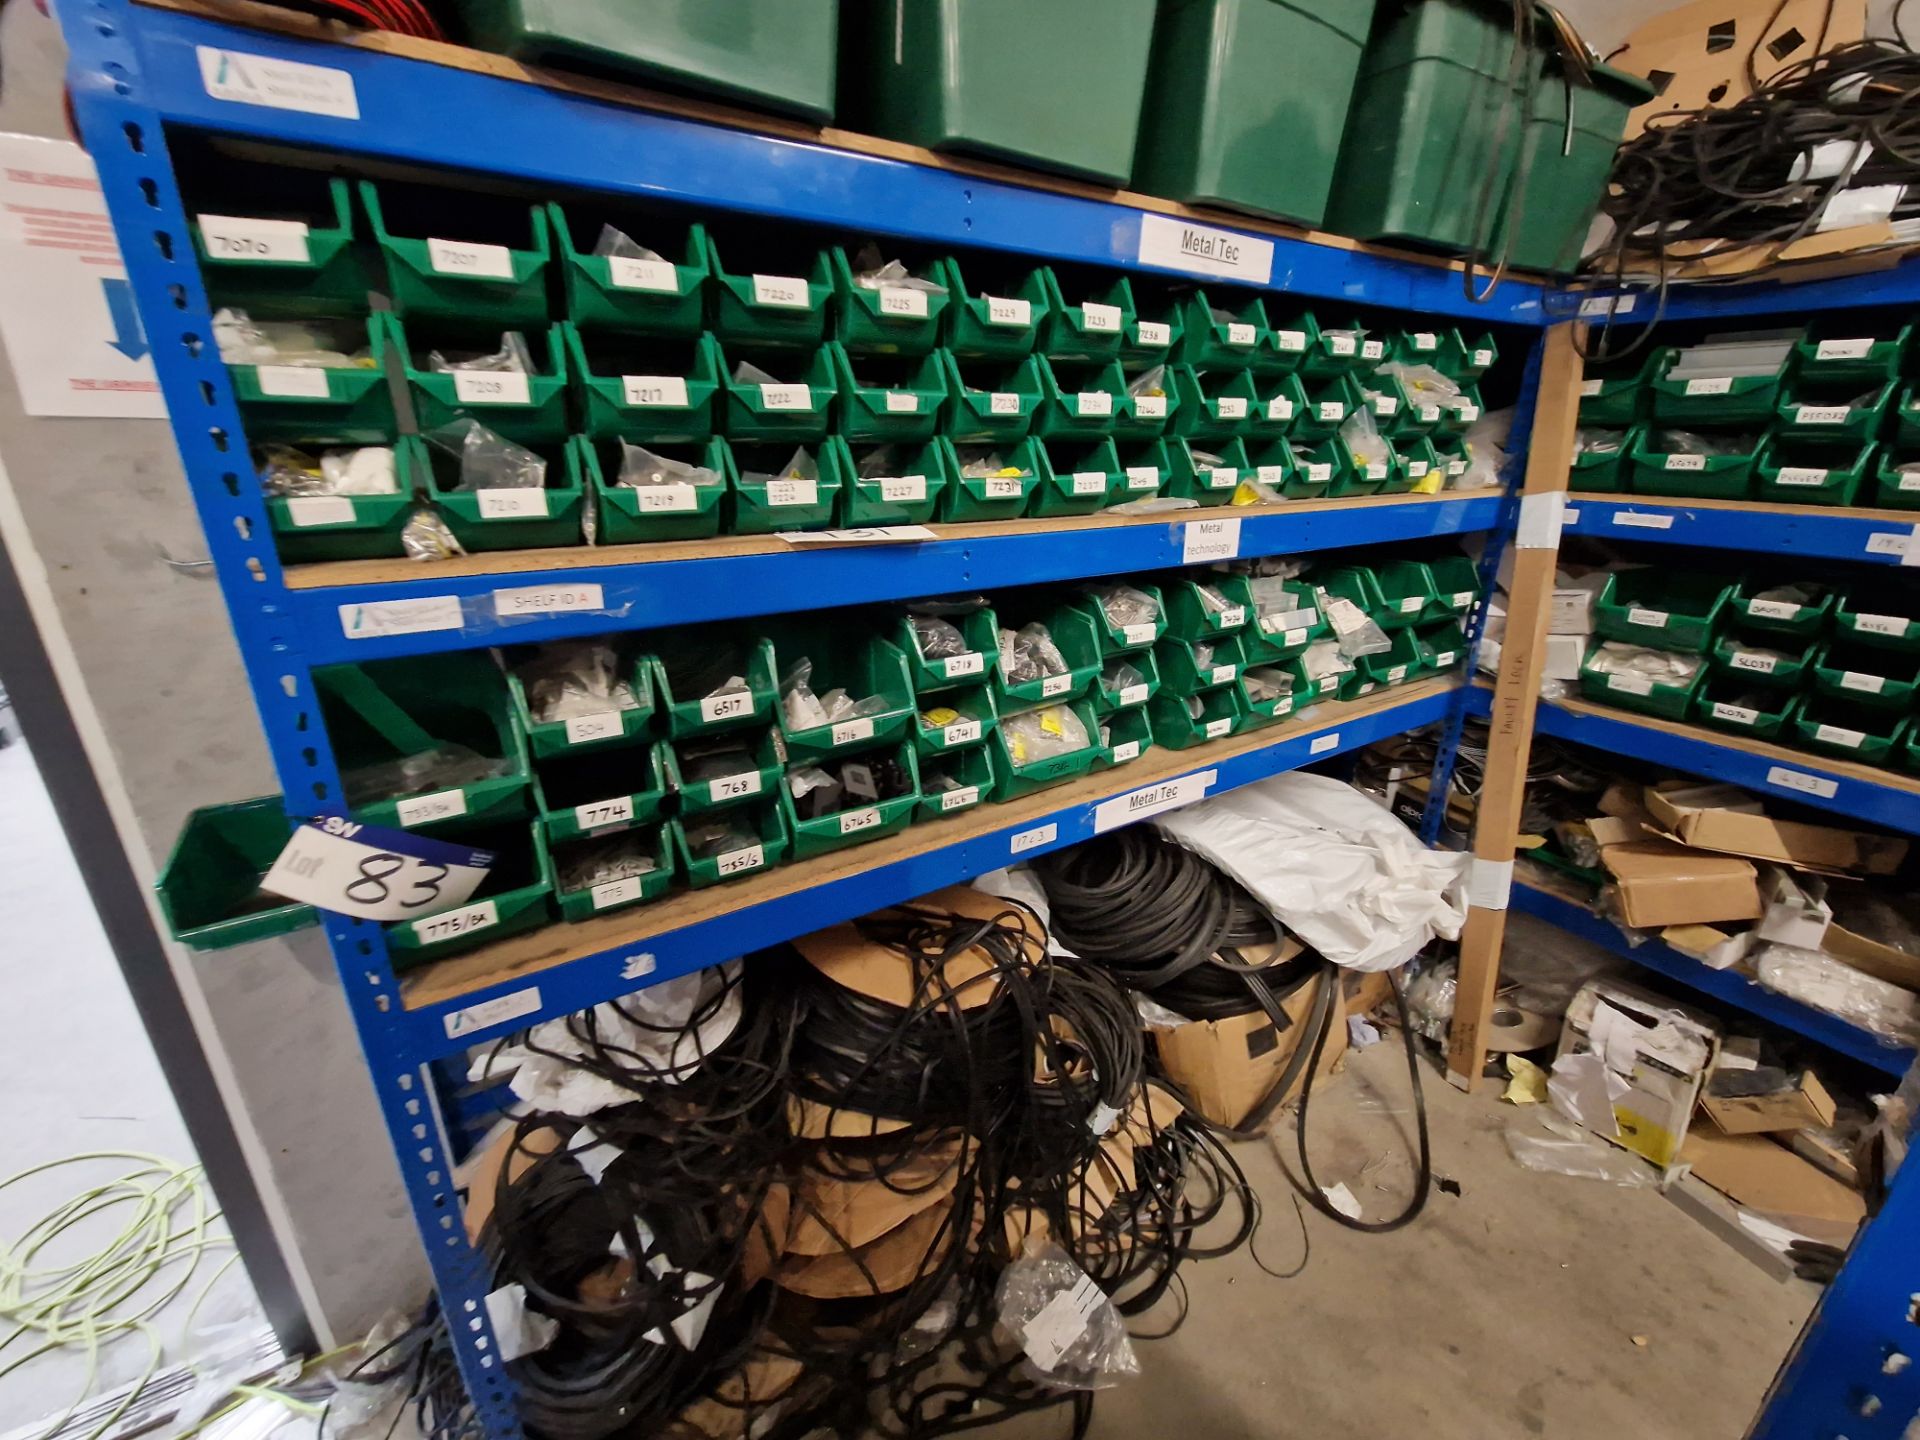 Contents to One Bay of Shelving, including Rubber Gaskets, Aluminium Profile, End Caps, Screws,